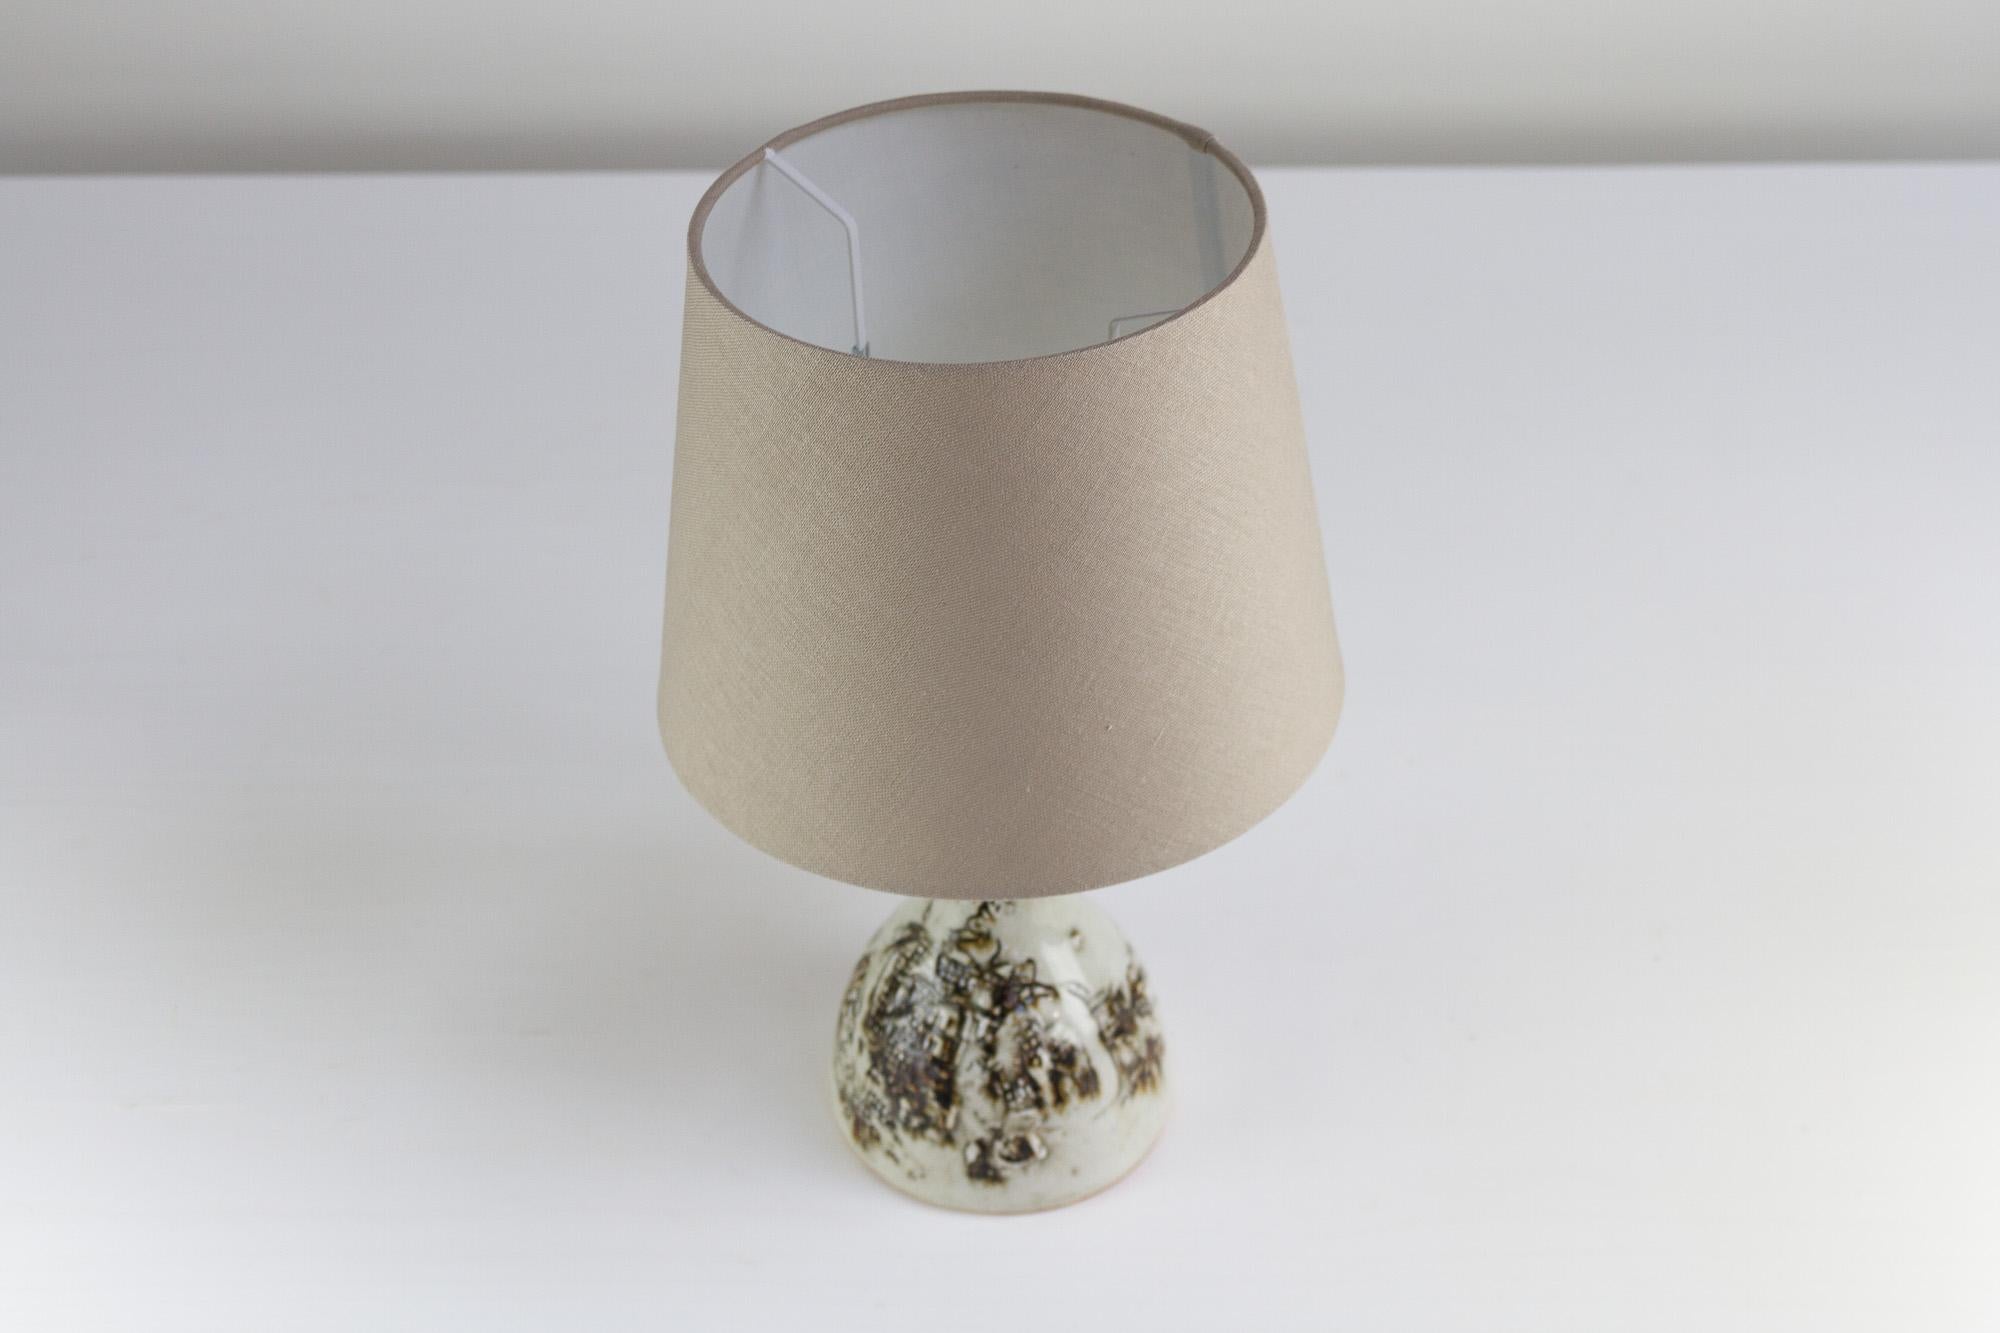 Vintage Danish Brutalist Ceramic Table Lamp by Conny Walther, 1960s For Sale 2